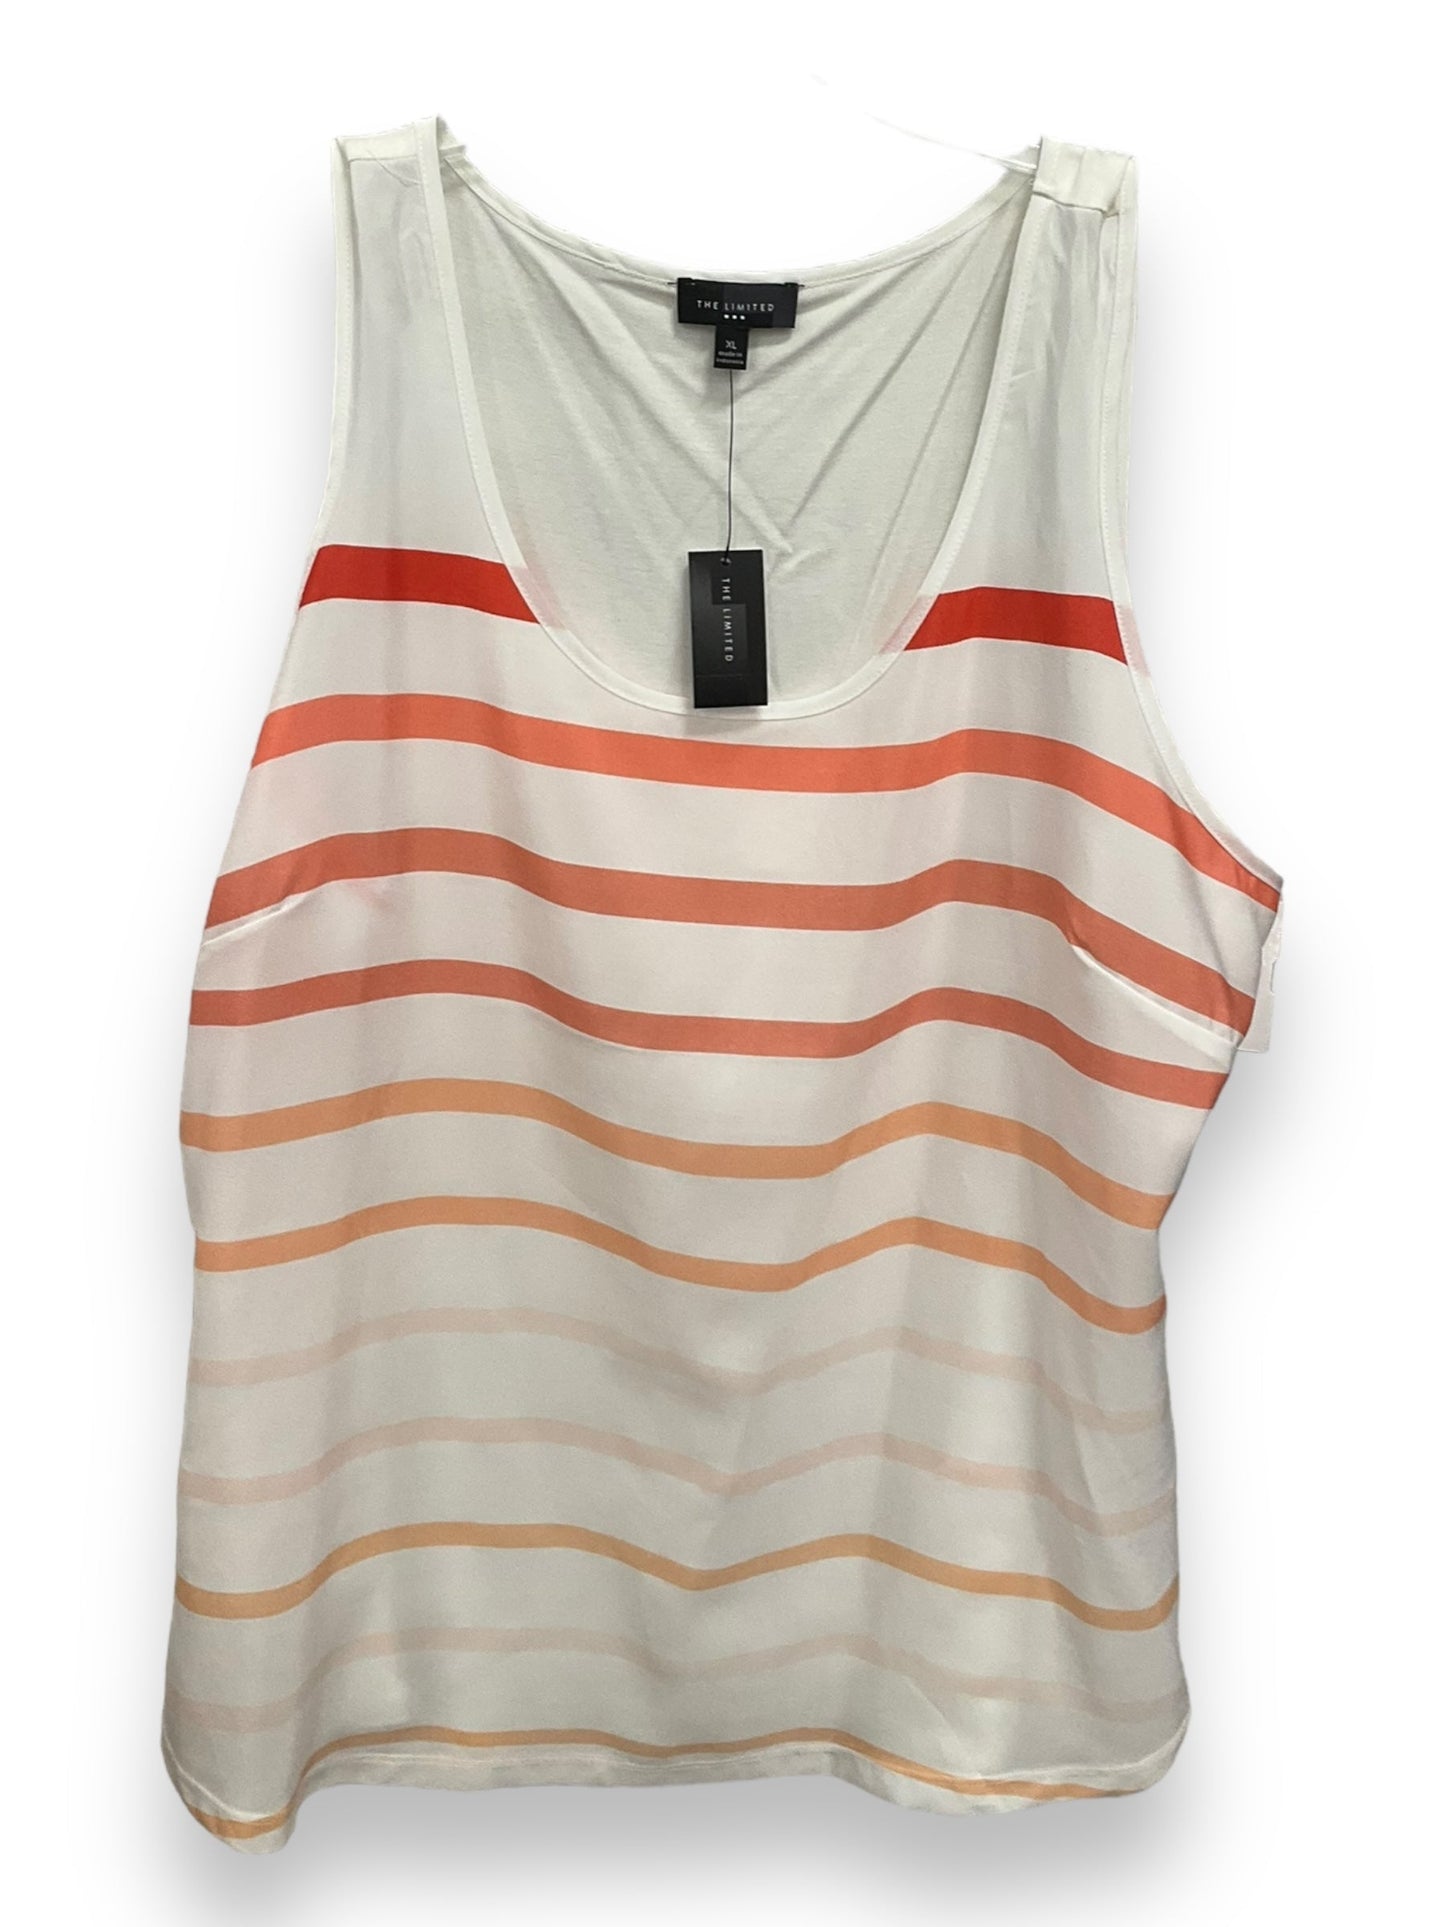 Striped Pattern Top Sleeveless Limited, Size Xl